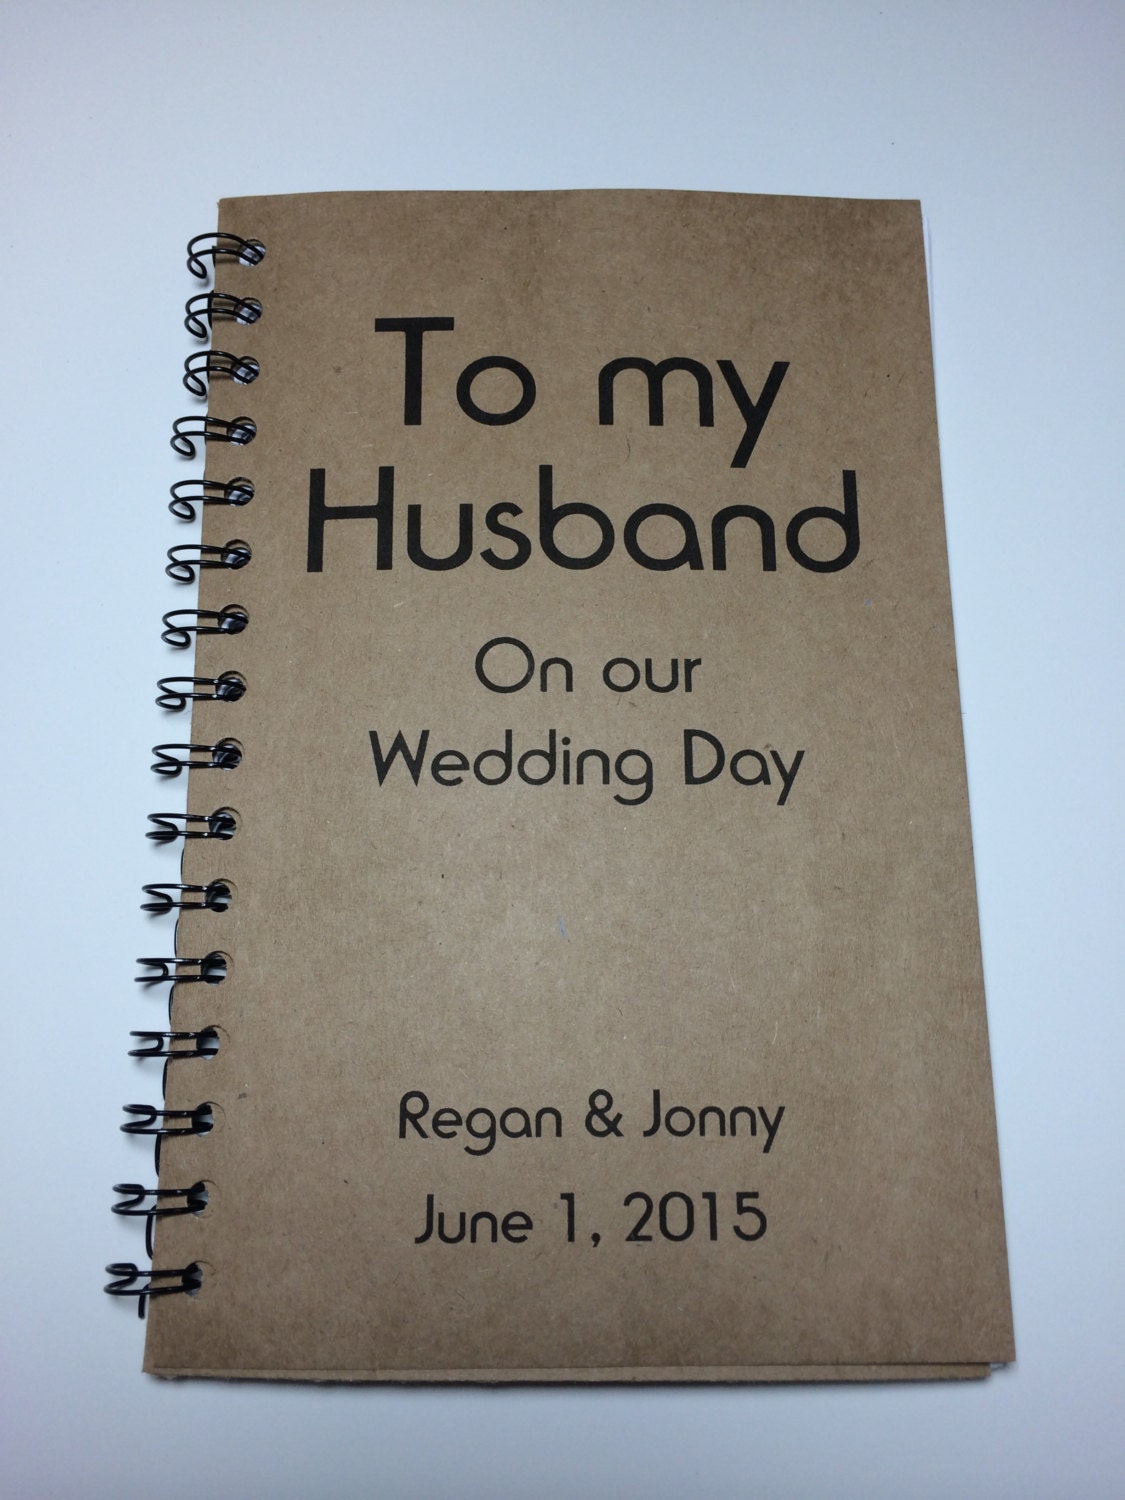 To my Husband on our Wedding Day Journal Notebook